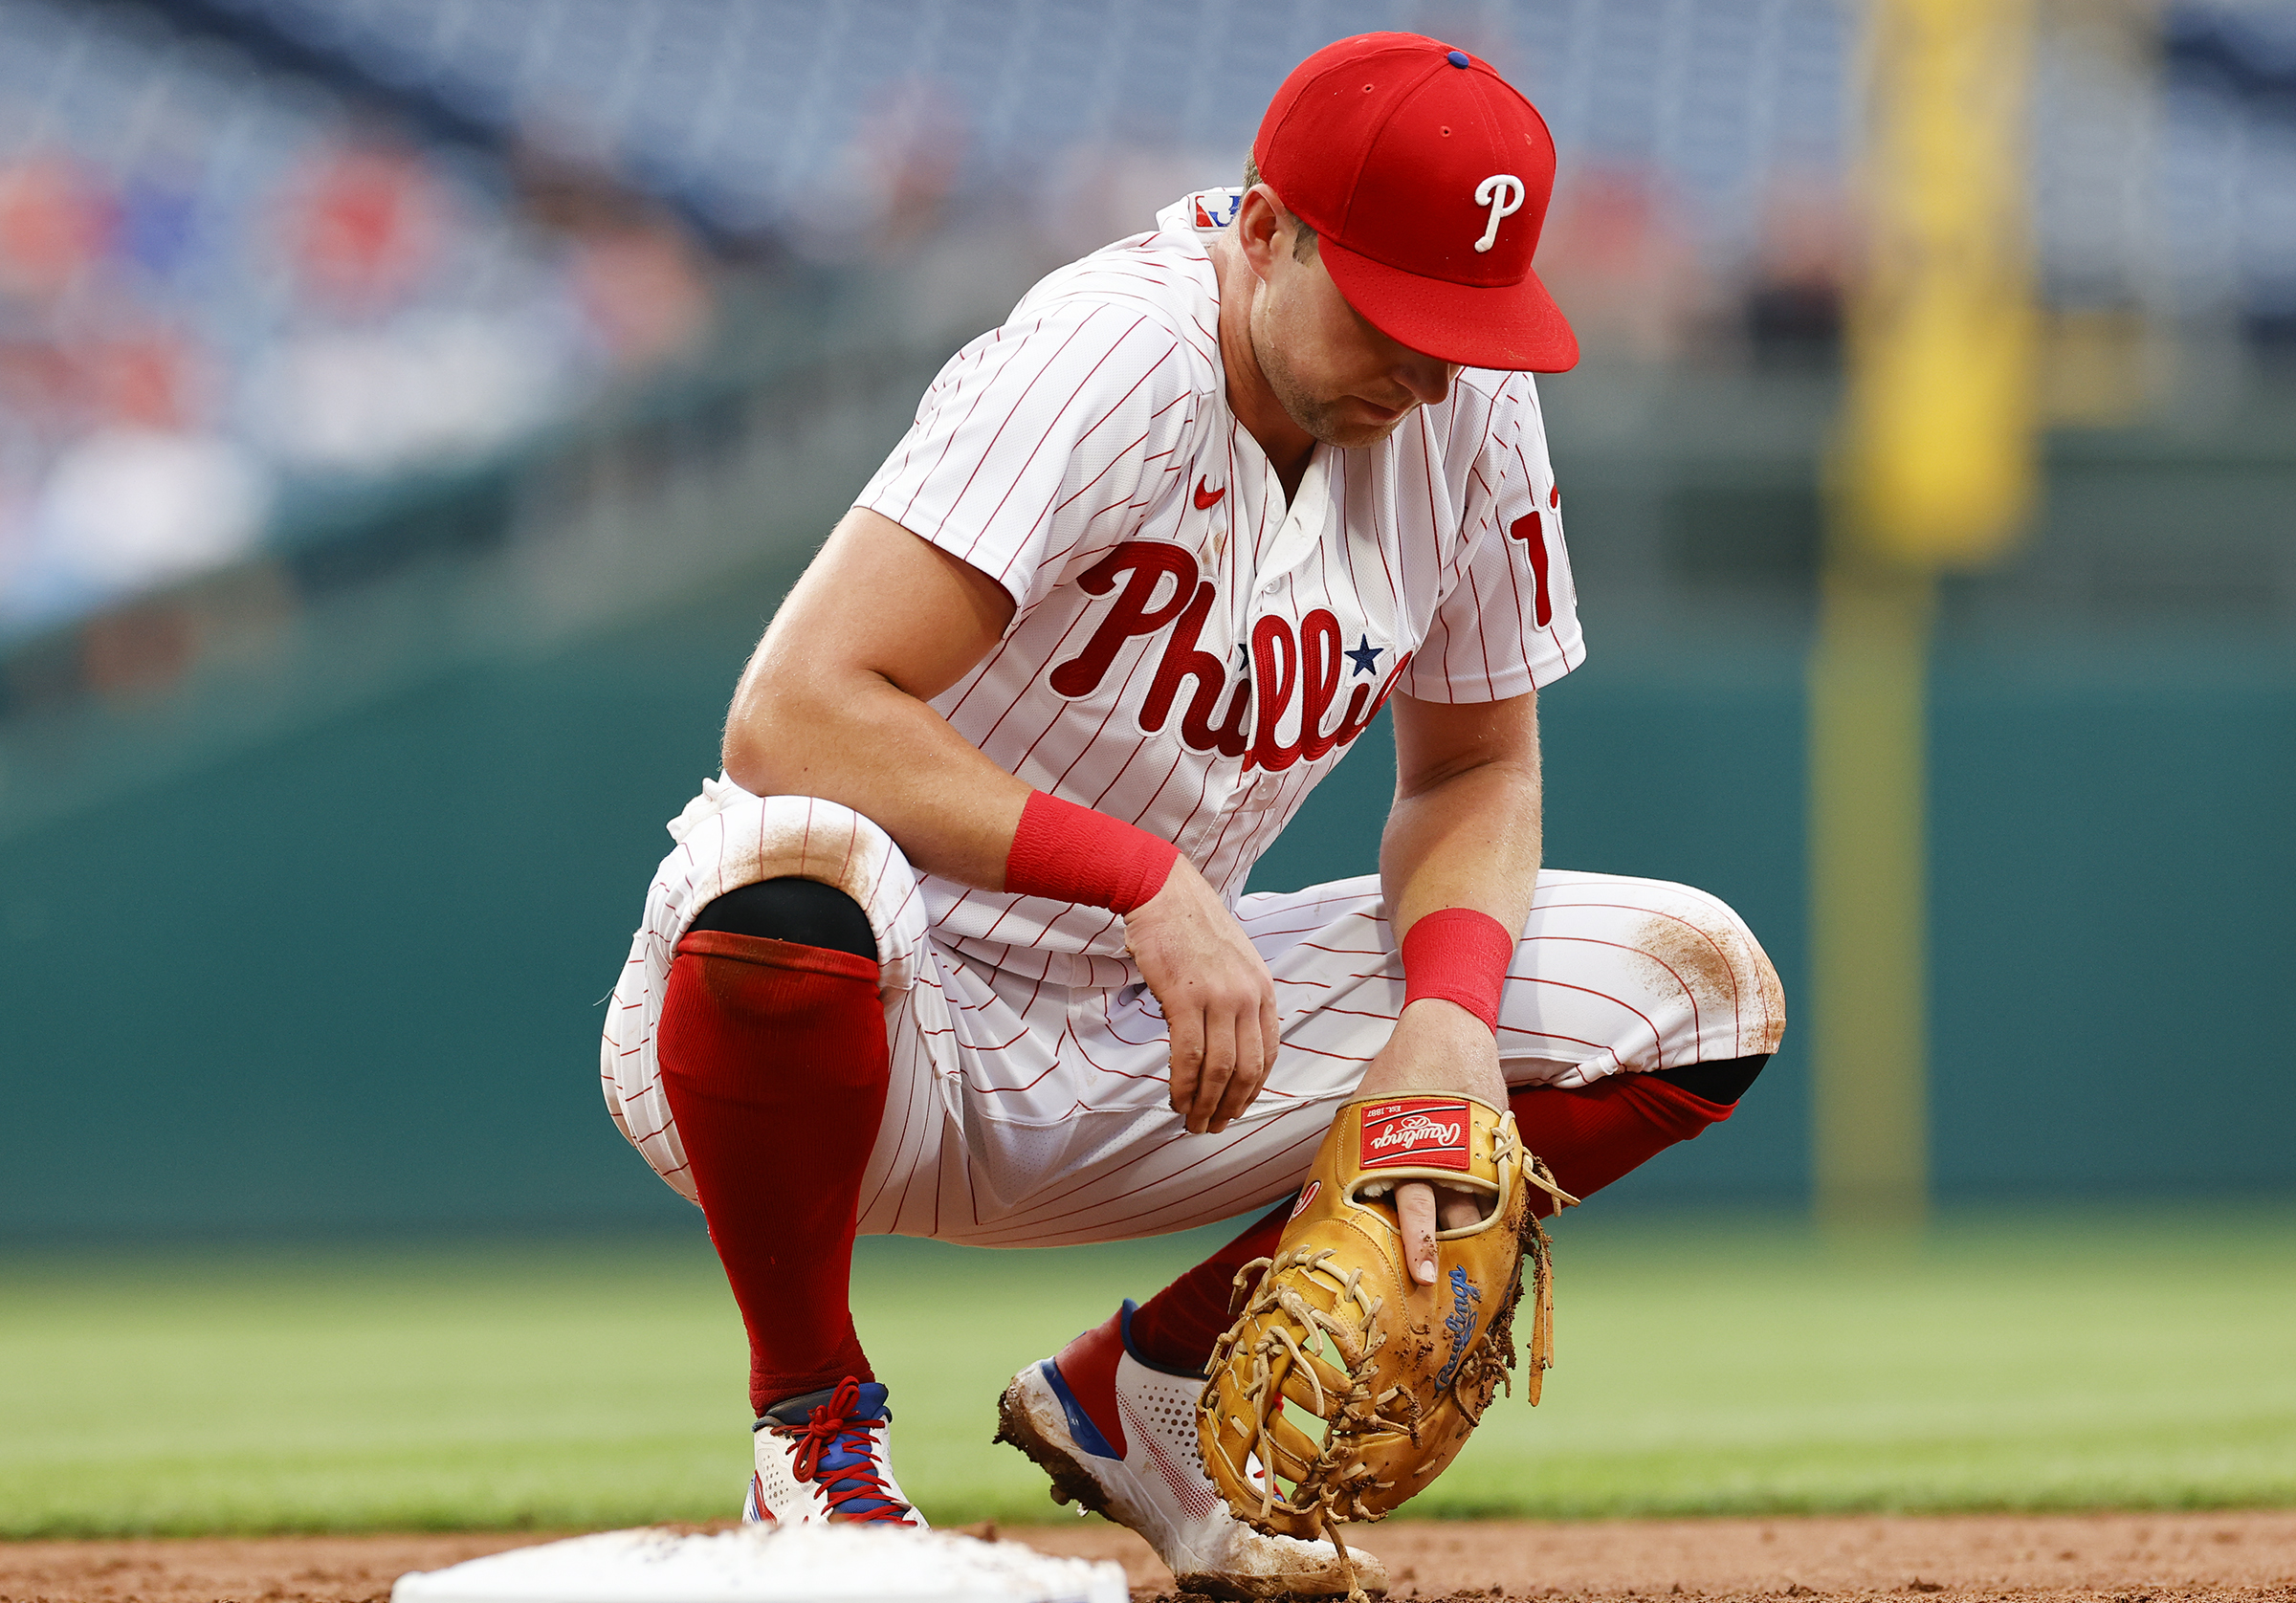 Bryson Stott Leads Phillies with .307 Batting Average, 9 Home Runs